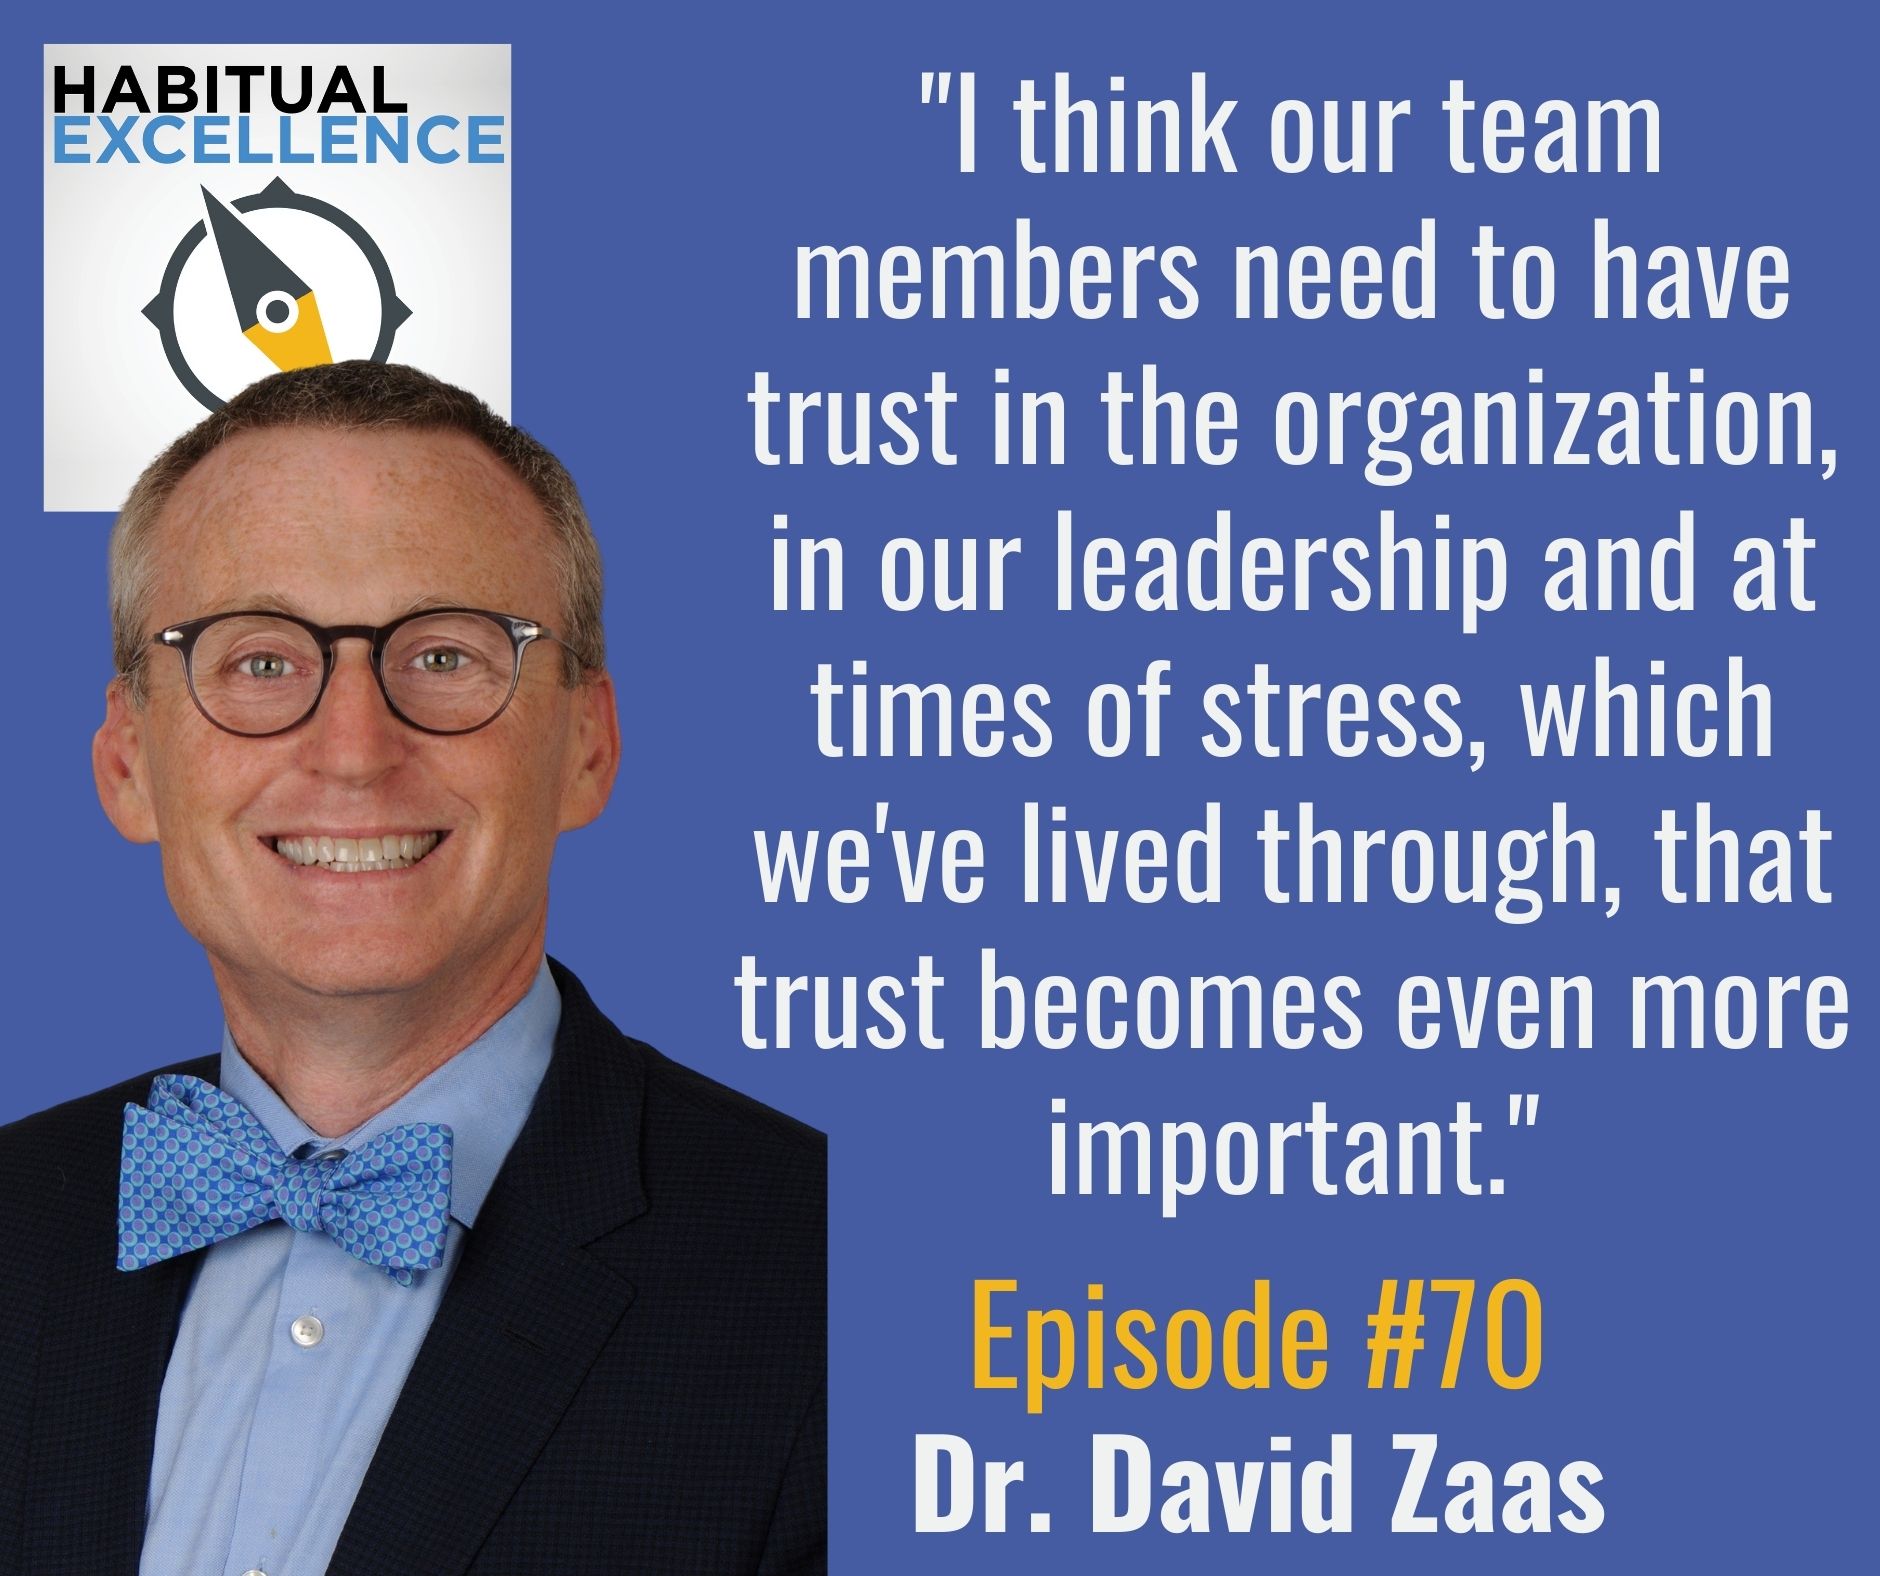 "I think our team members need to have trust in the organization, in our leadership and at times of stress, which we've lived through, that trust becomes even more important."